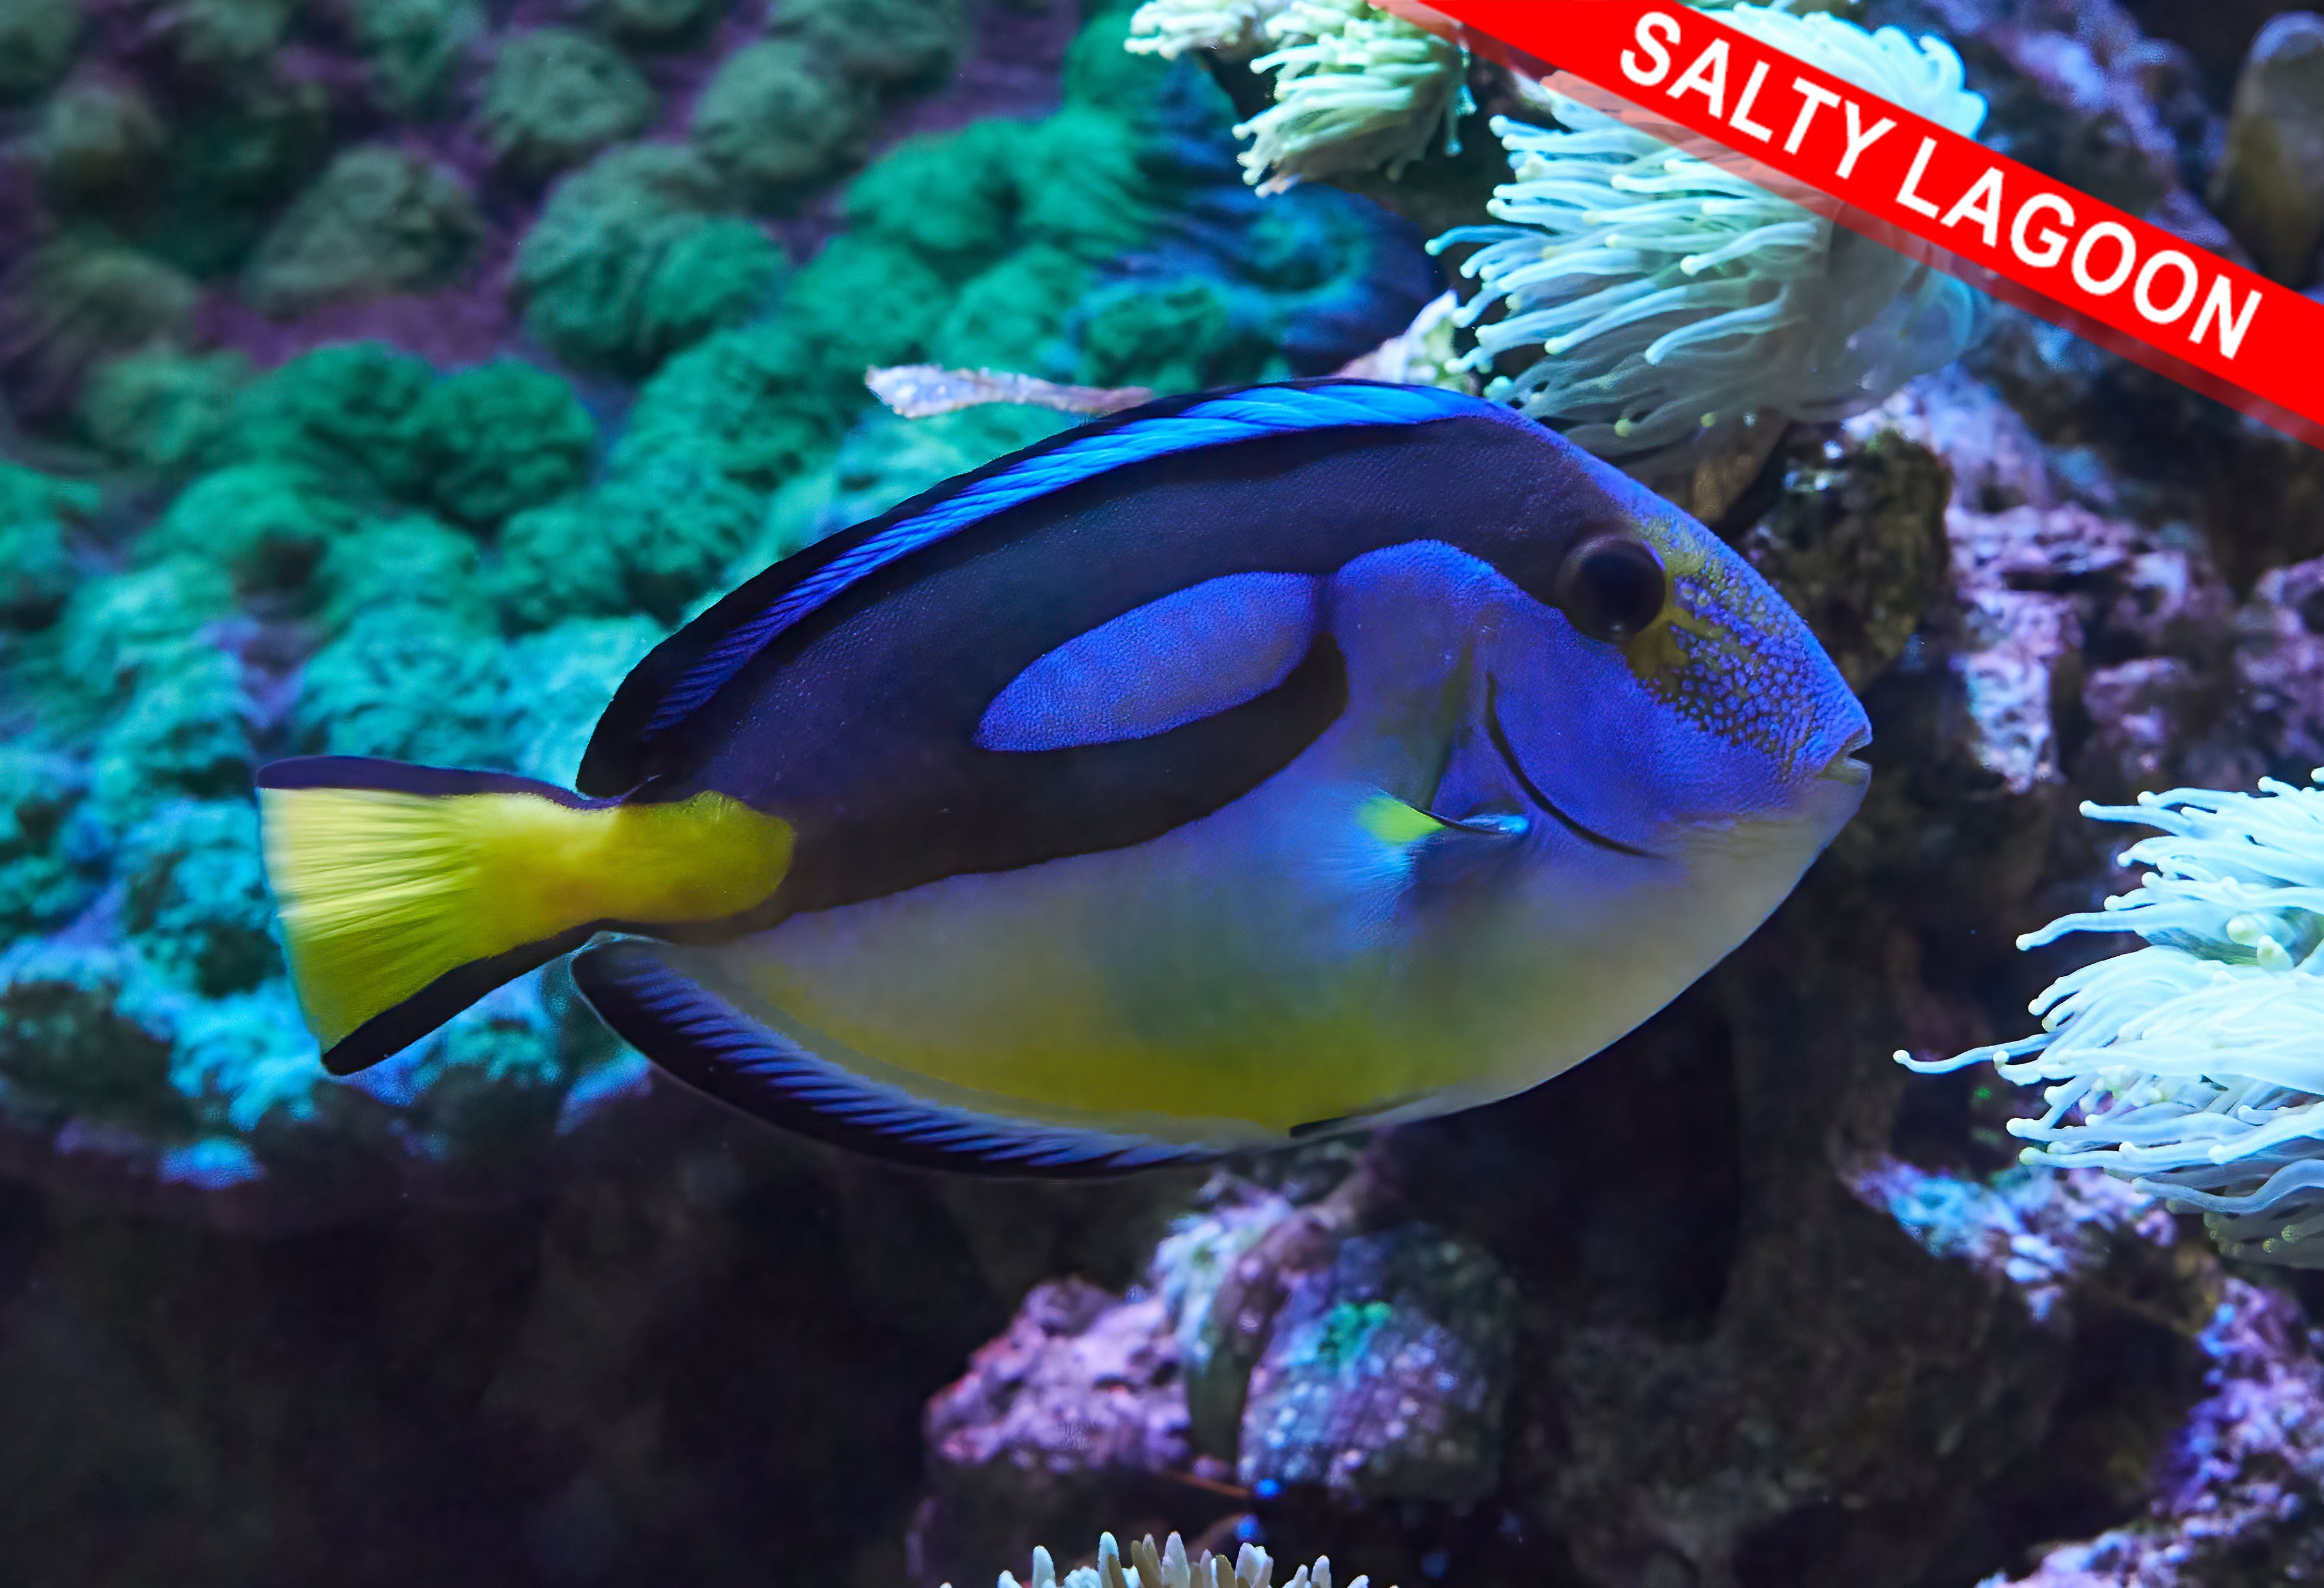 Yellow Belly Blue (Regal) Tang (Quarantined)